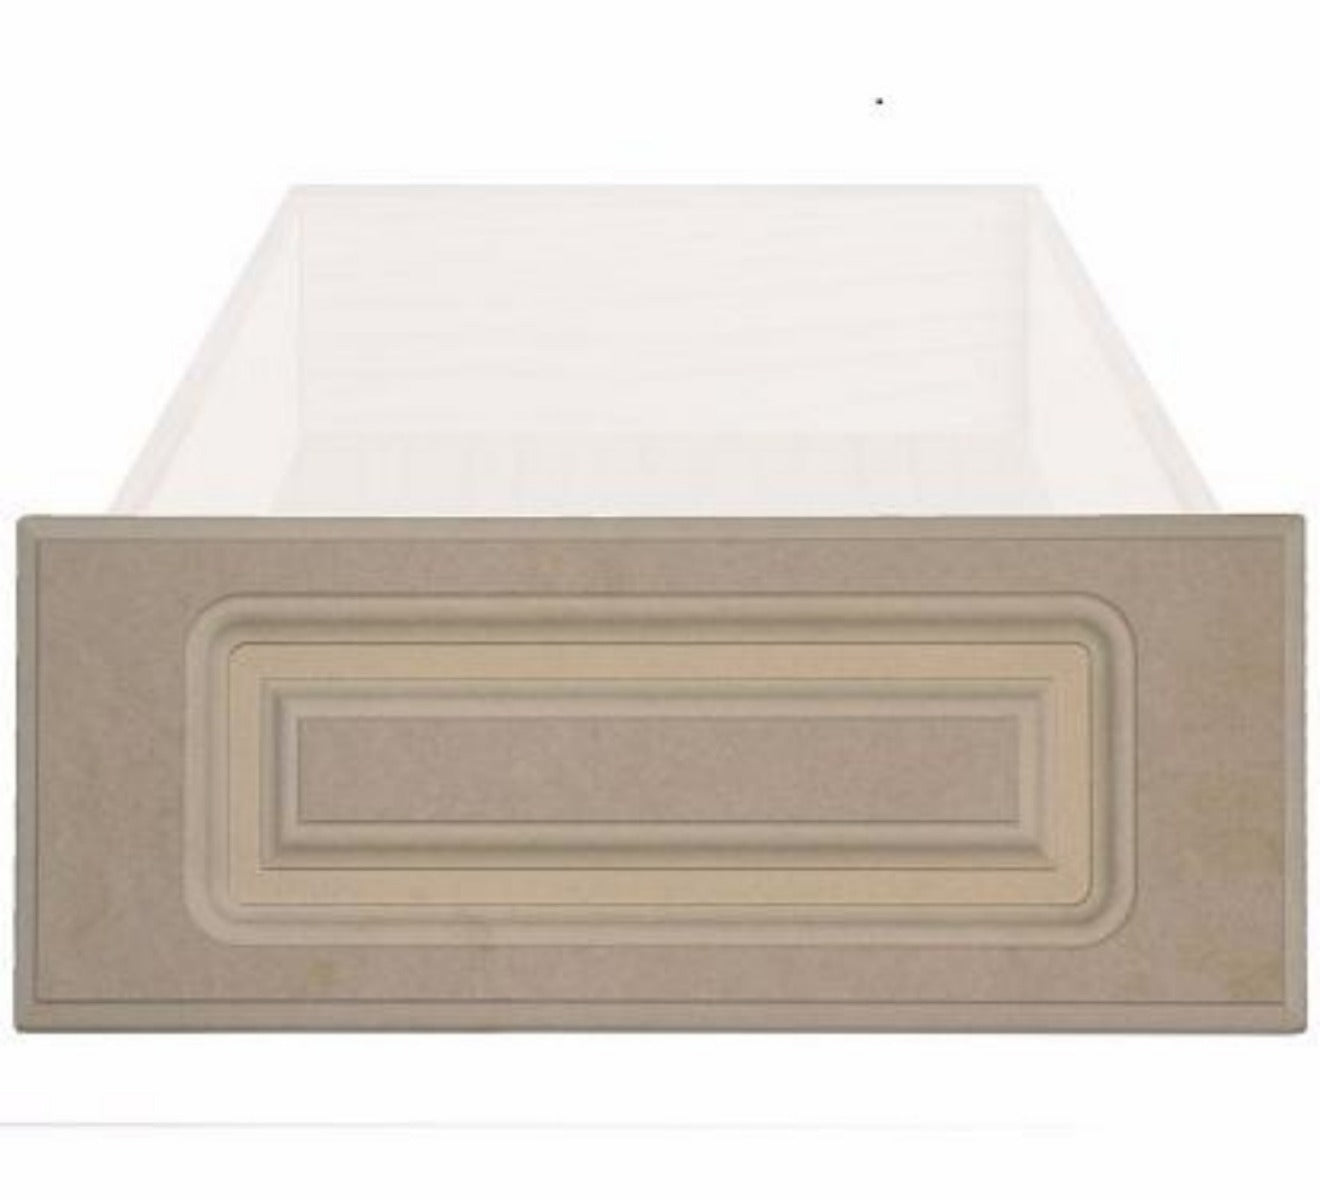 MDF Naples Thermofoil Raised Square Custom Cabinet Drawer Front